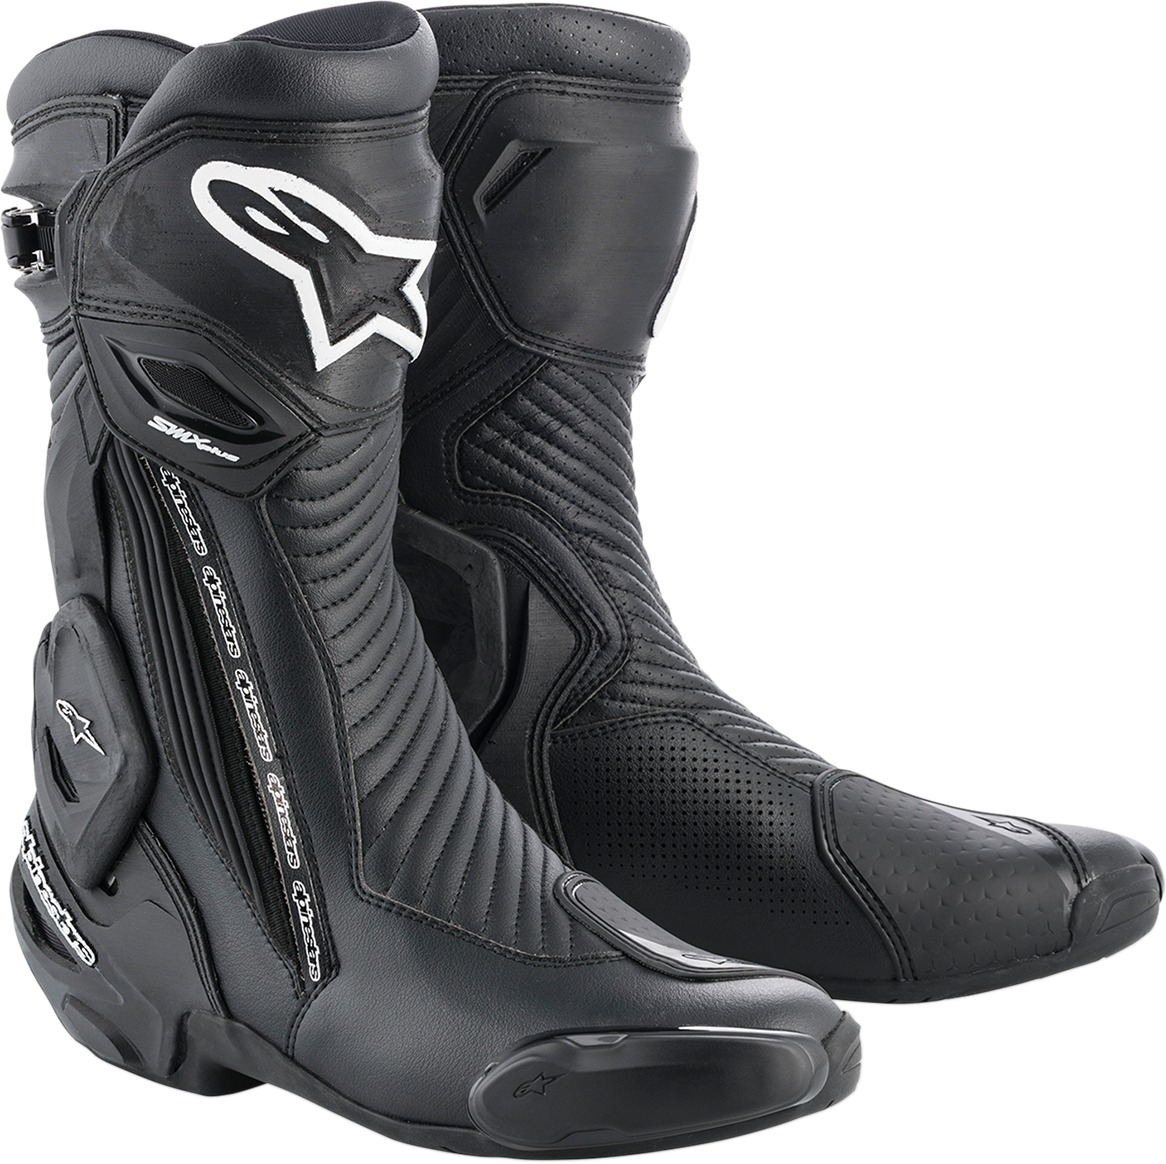 SMX Plus Street Riding Boots Black US 12.5 - Click Image to Close